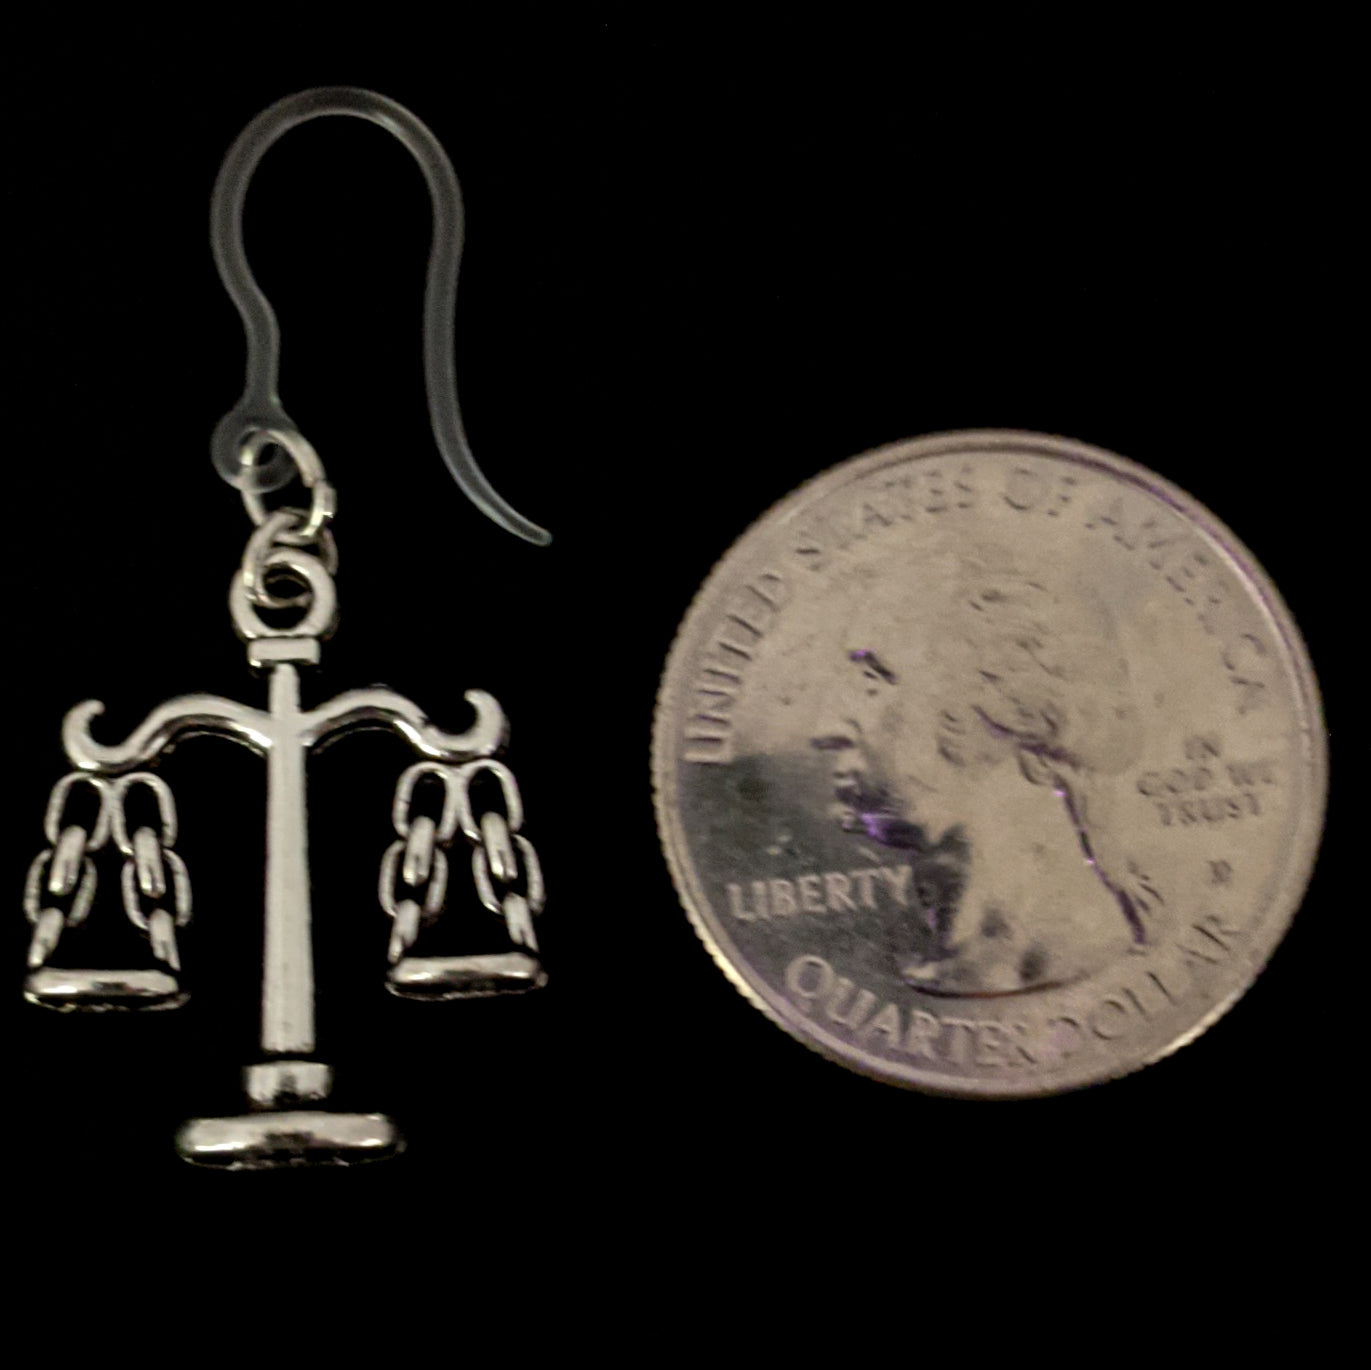 Scales of Justice Earrings (Dangles) - small - size comparison quarter